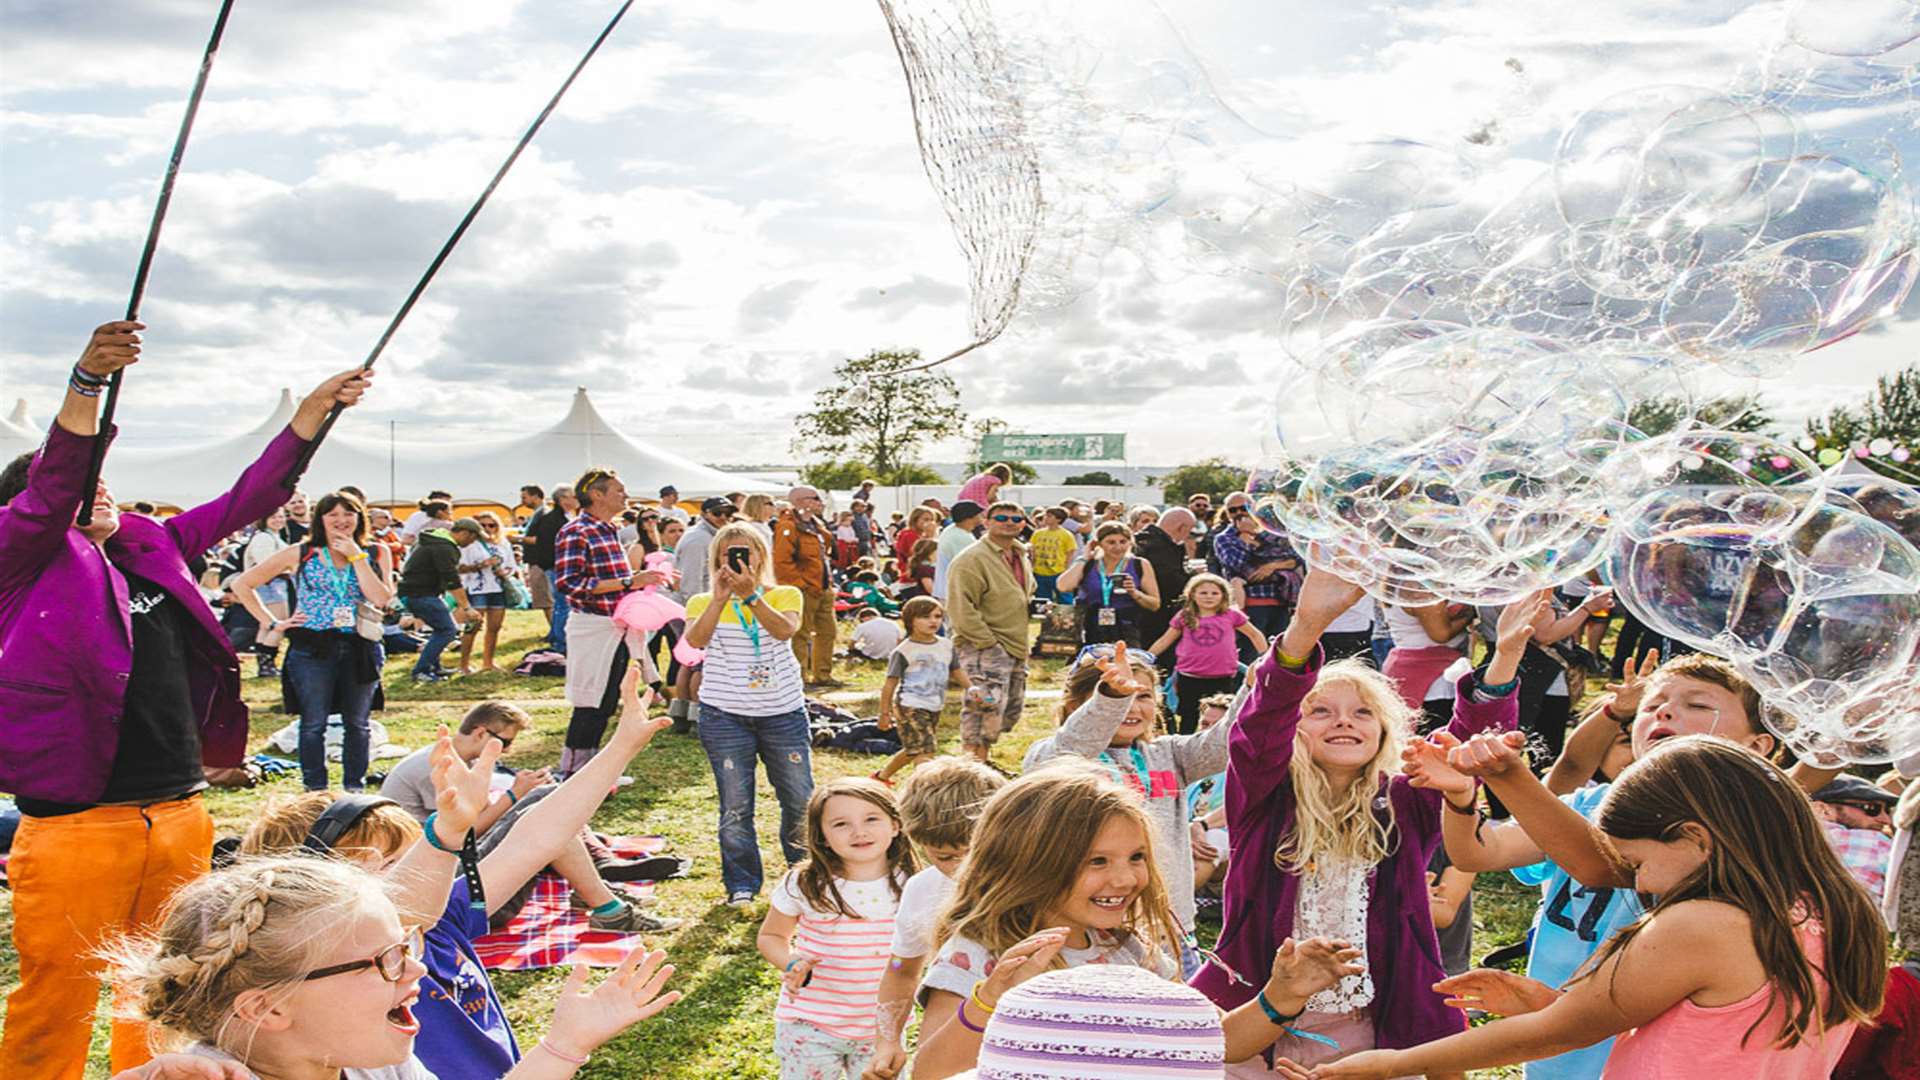 The Big Festival takes place at Alex James' farm in the Cotswolds